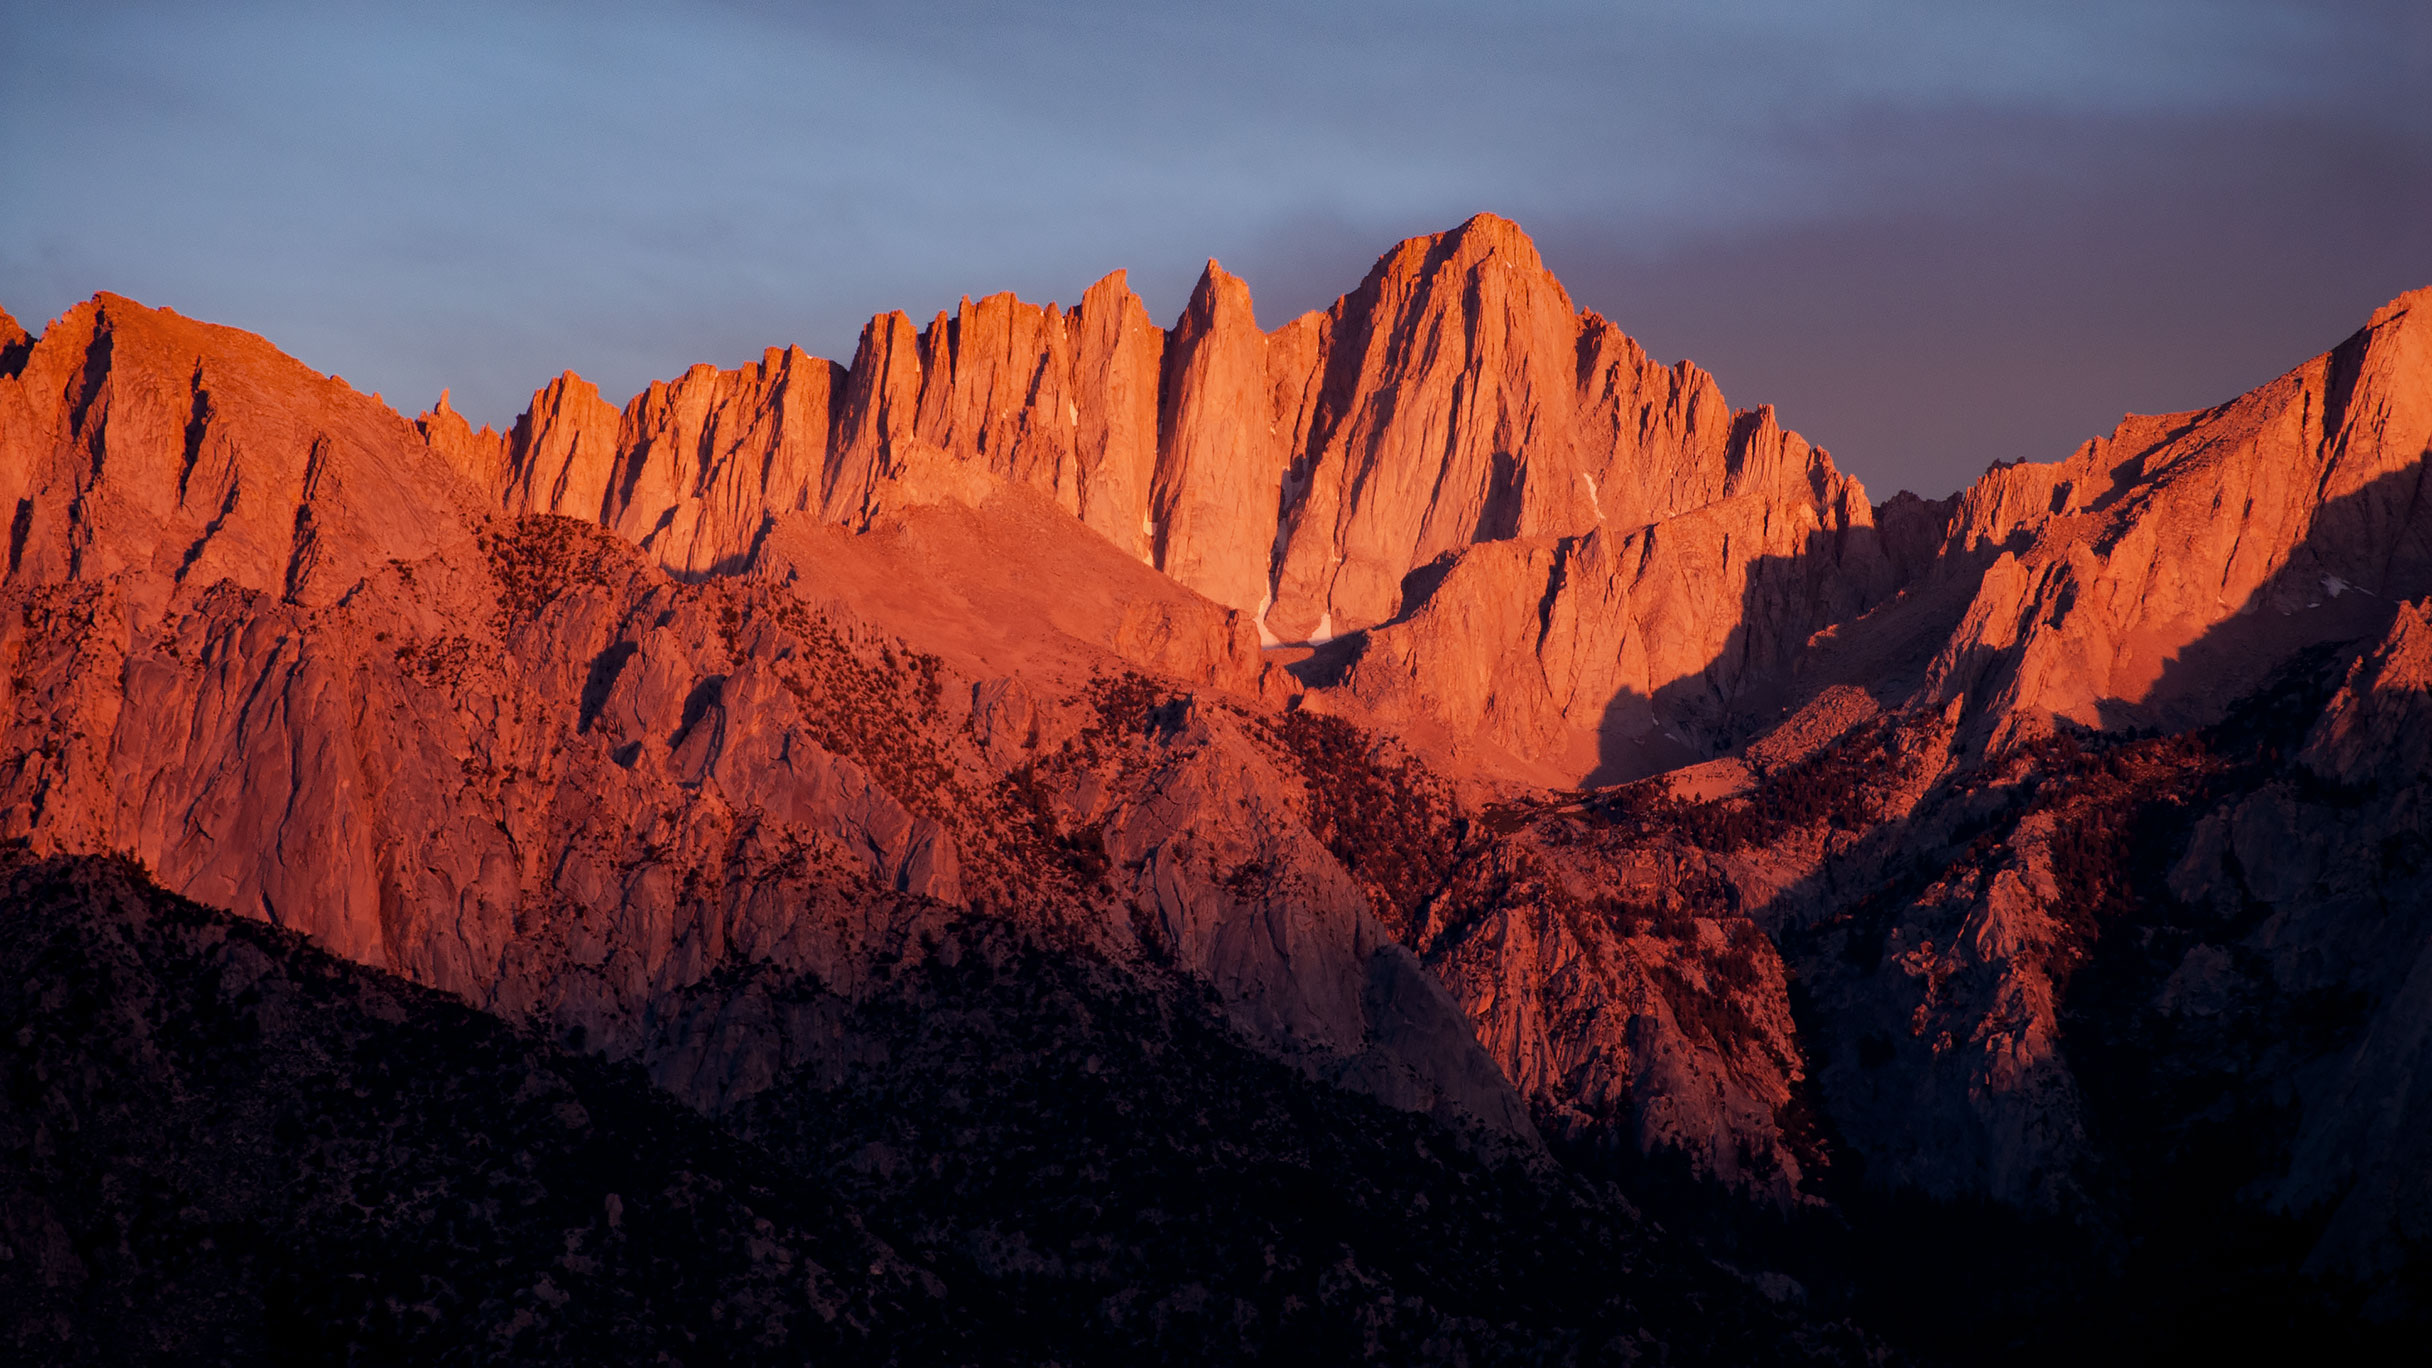 Mount Whitney and the Mountaineer's Route